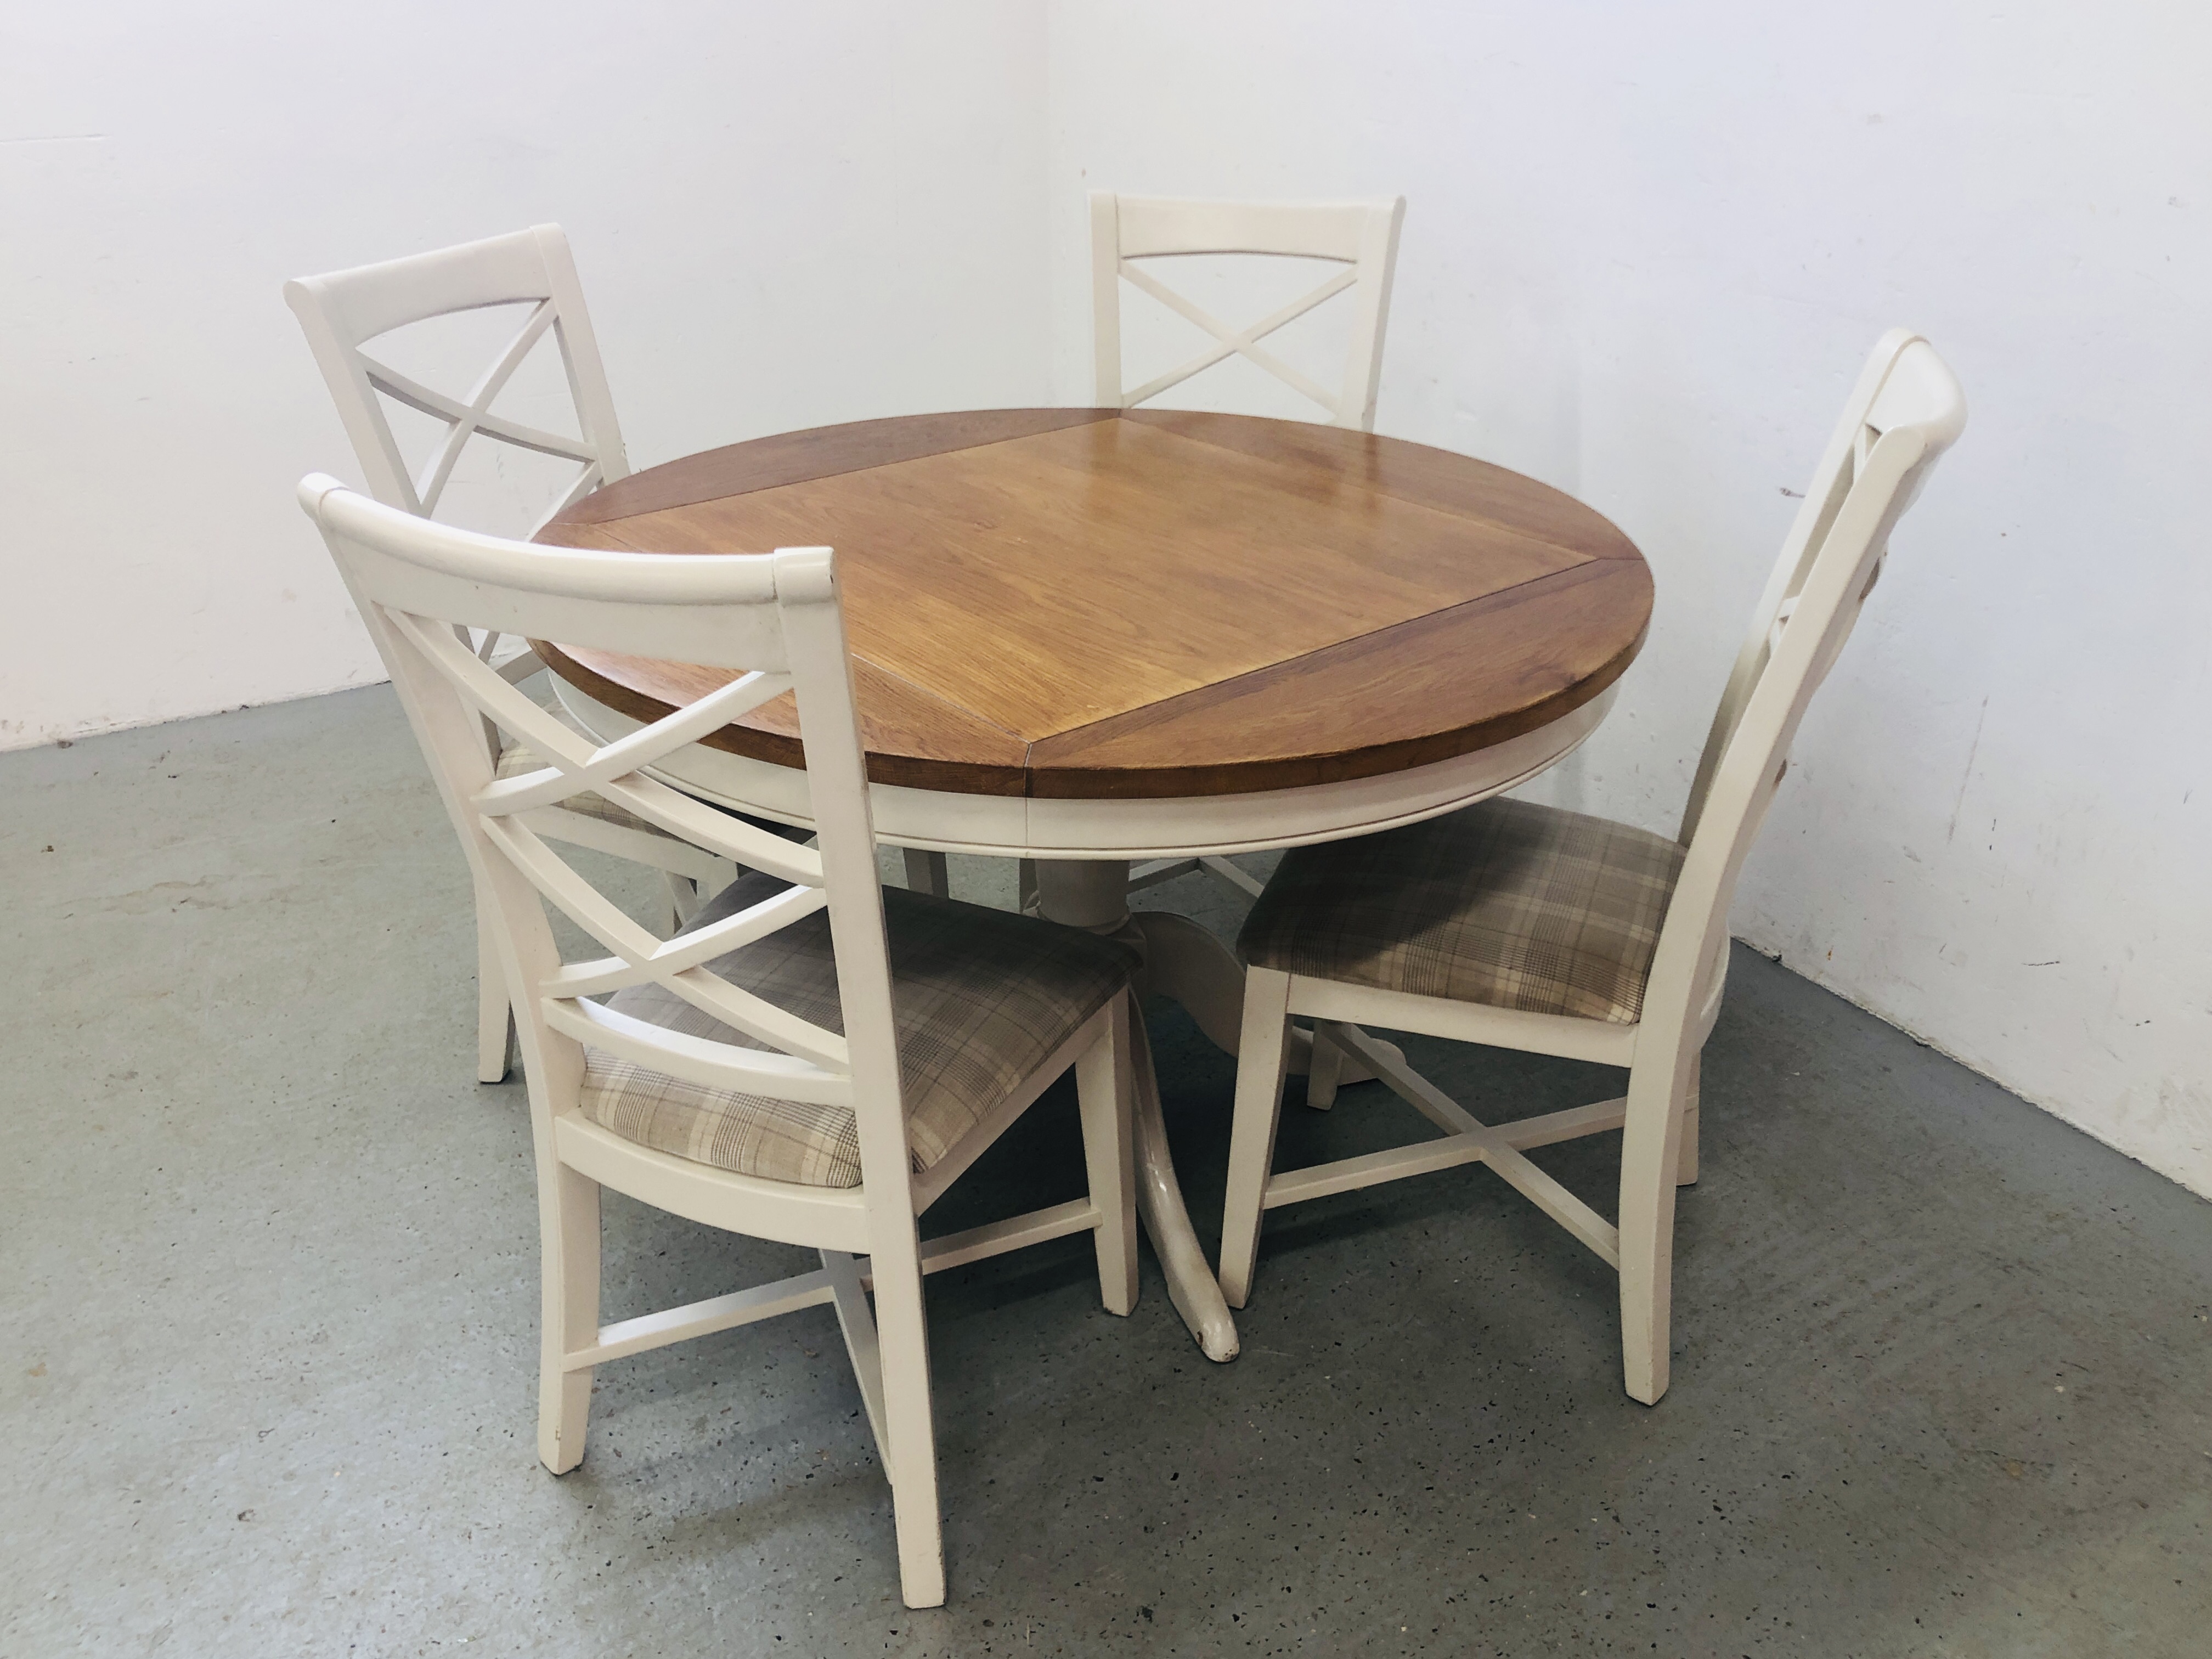 A MODERN CIRCULAR DINING TABLE COMPLETE WITH 4 CHAIRS